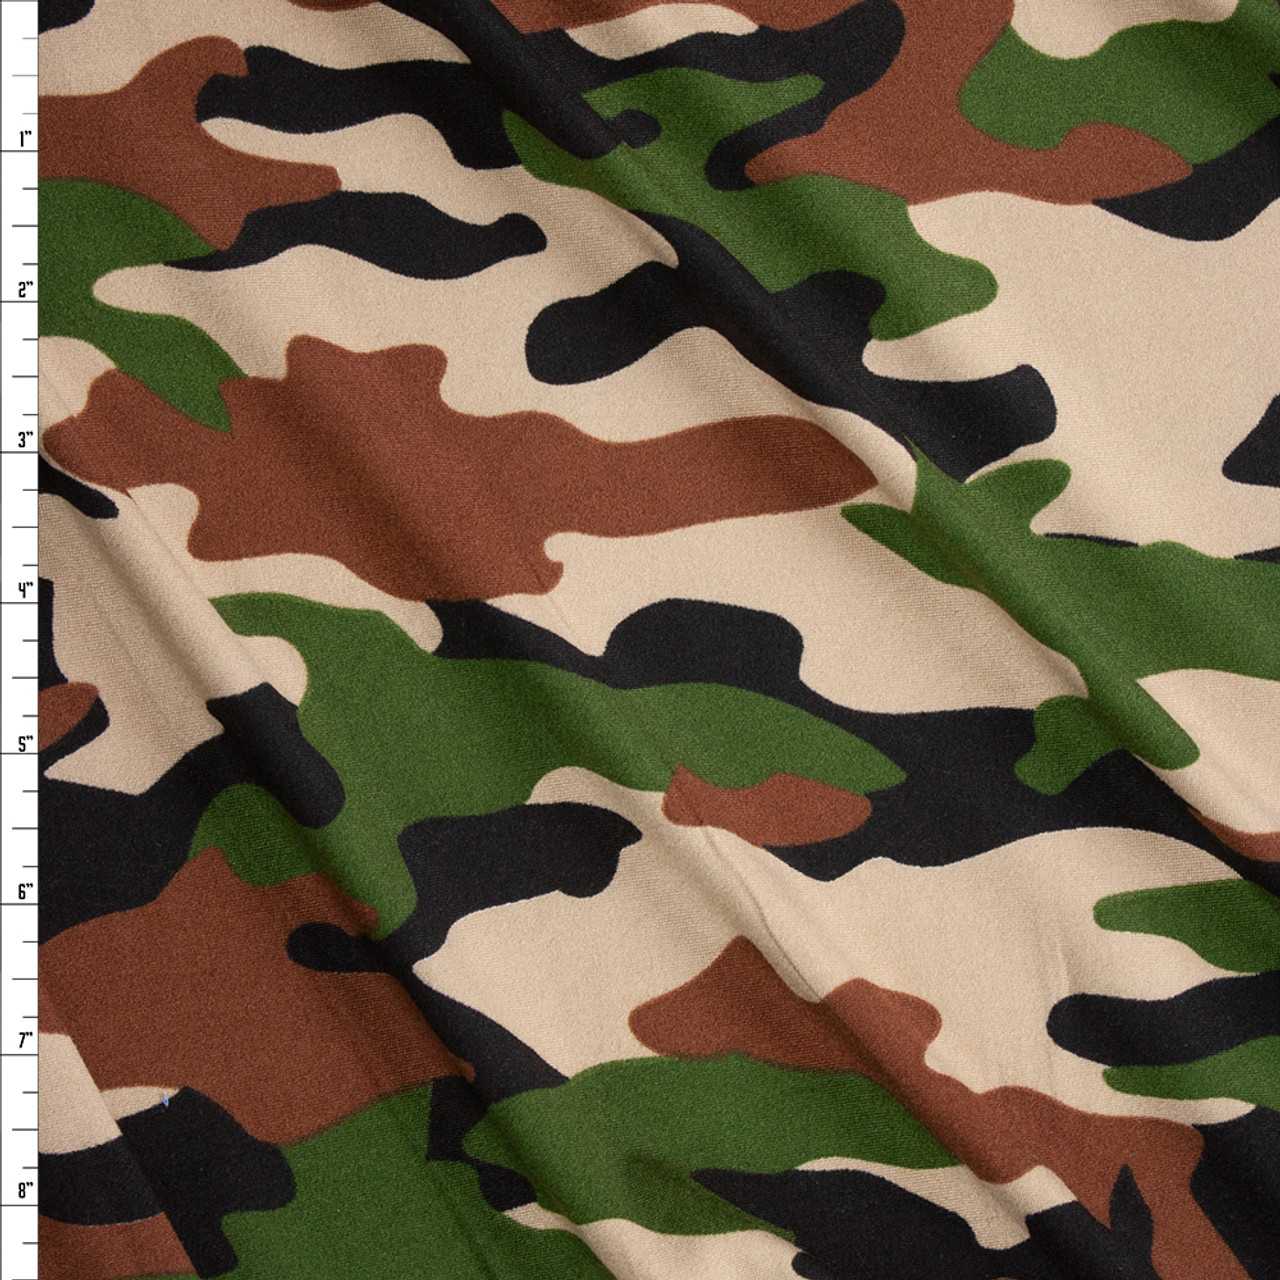 Green Olive Woodland Camo Camouflage Cotton Fabric By The (1/2) Half-Yard  44W 